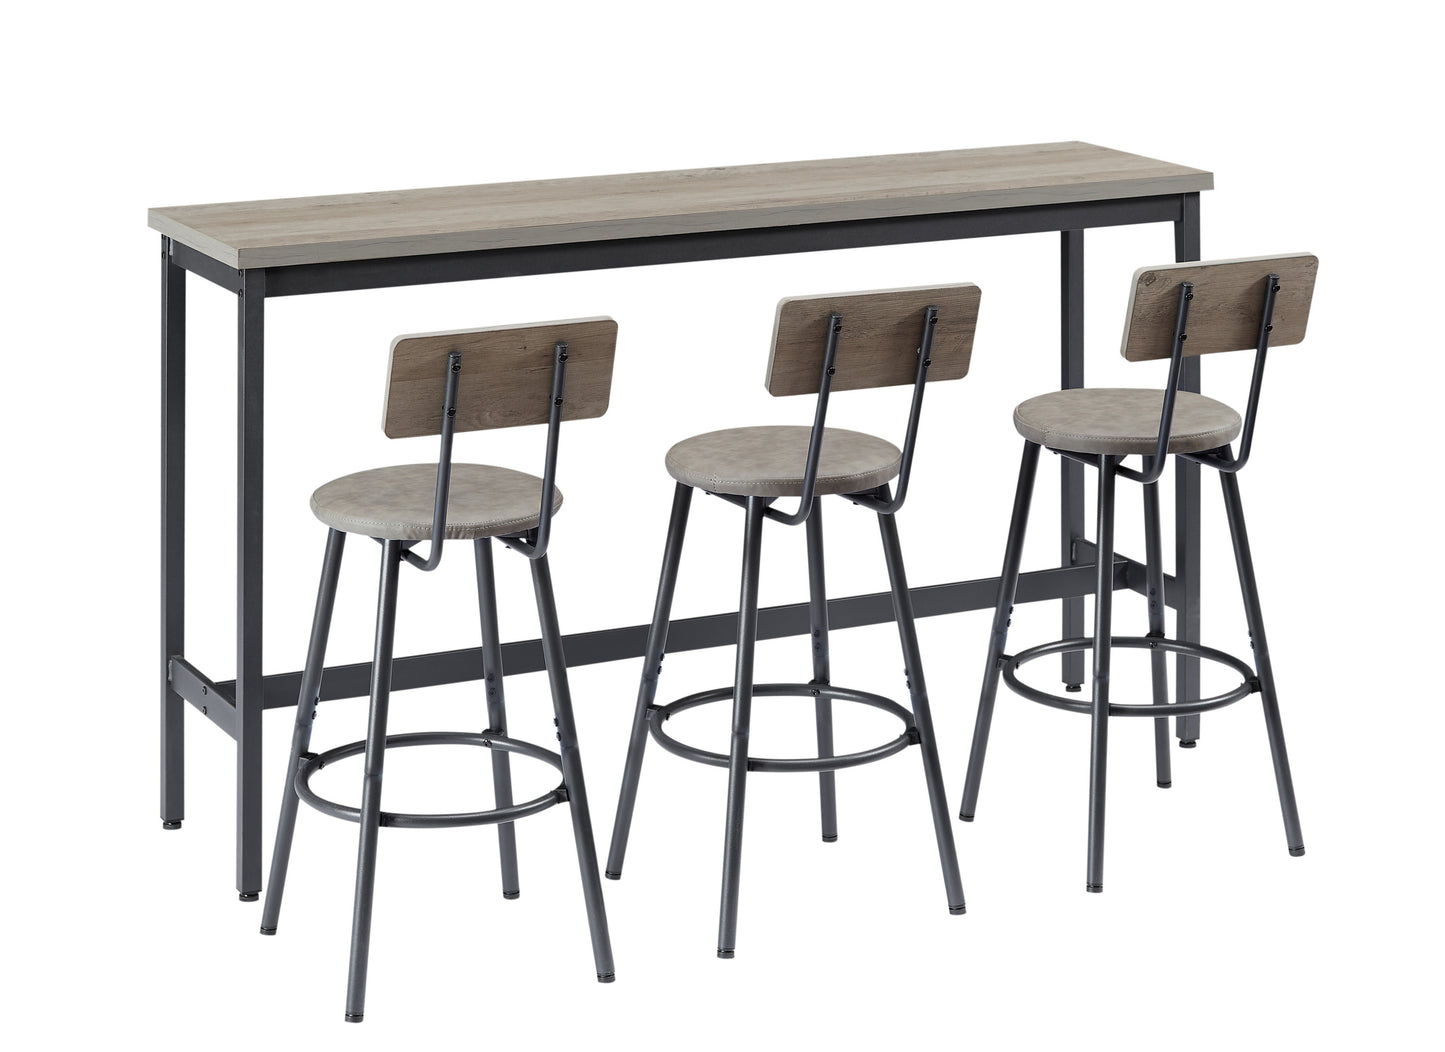 Long Bar Table Set with 3 PU Upholstered Bar Stools, Industrial Bar Table and Chairs for Kitchen Breakfast Table, Living Room, Banquet Hall, Rustic Gray and Black, 63″L x15.7"W x 37.5"H